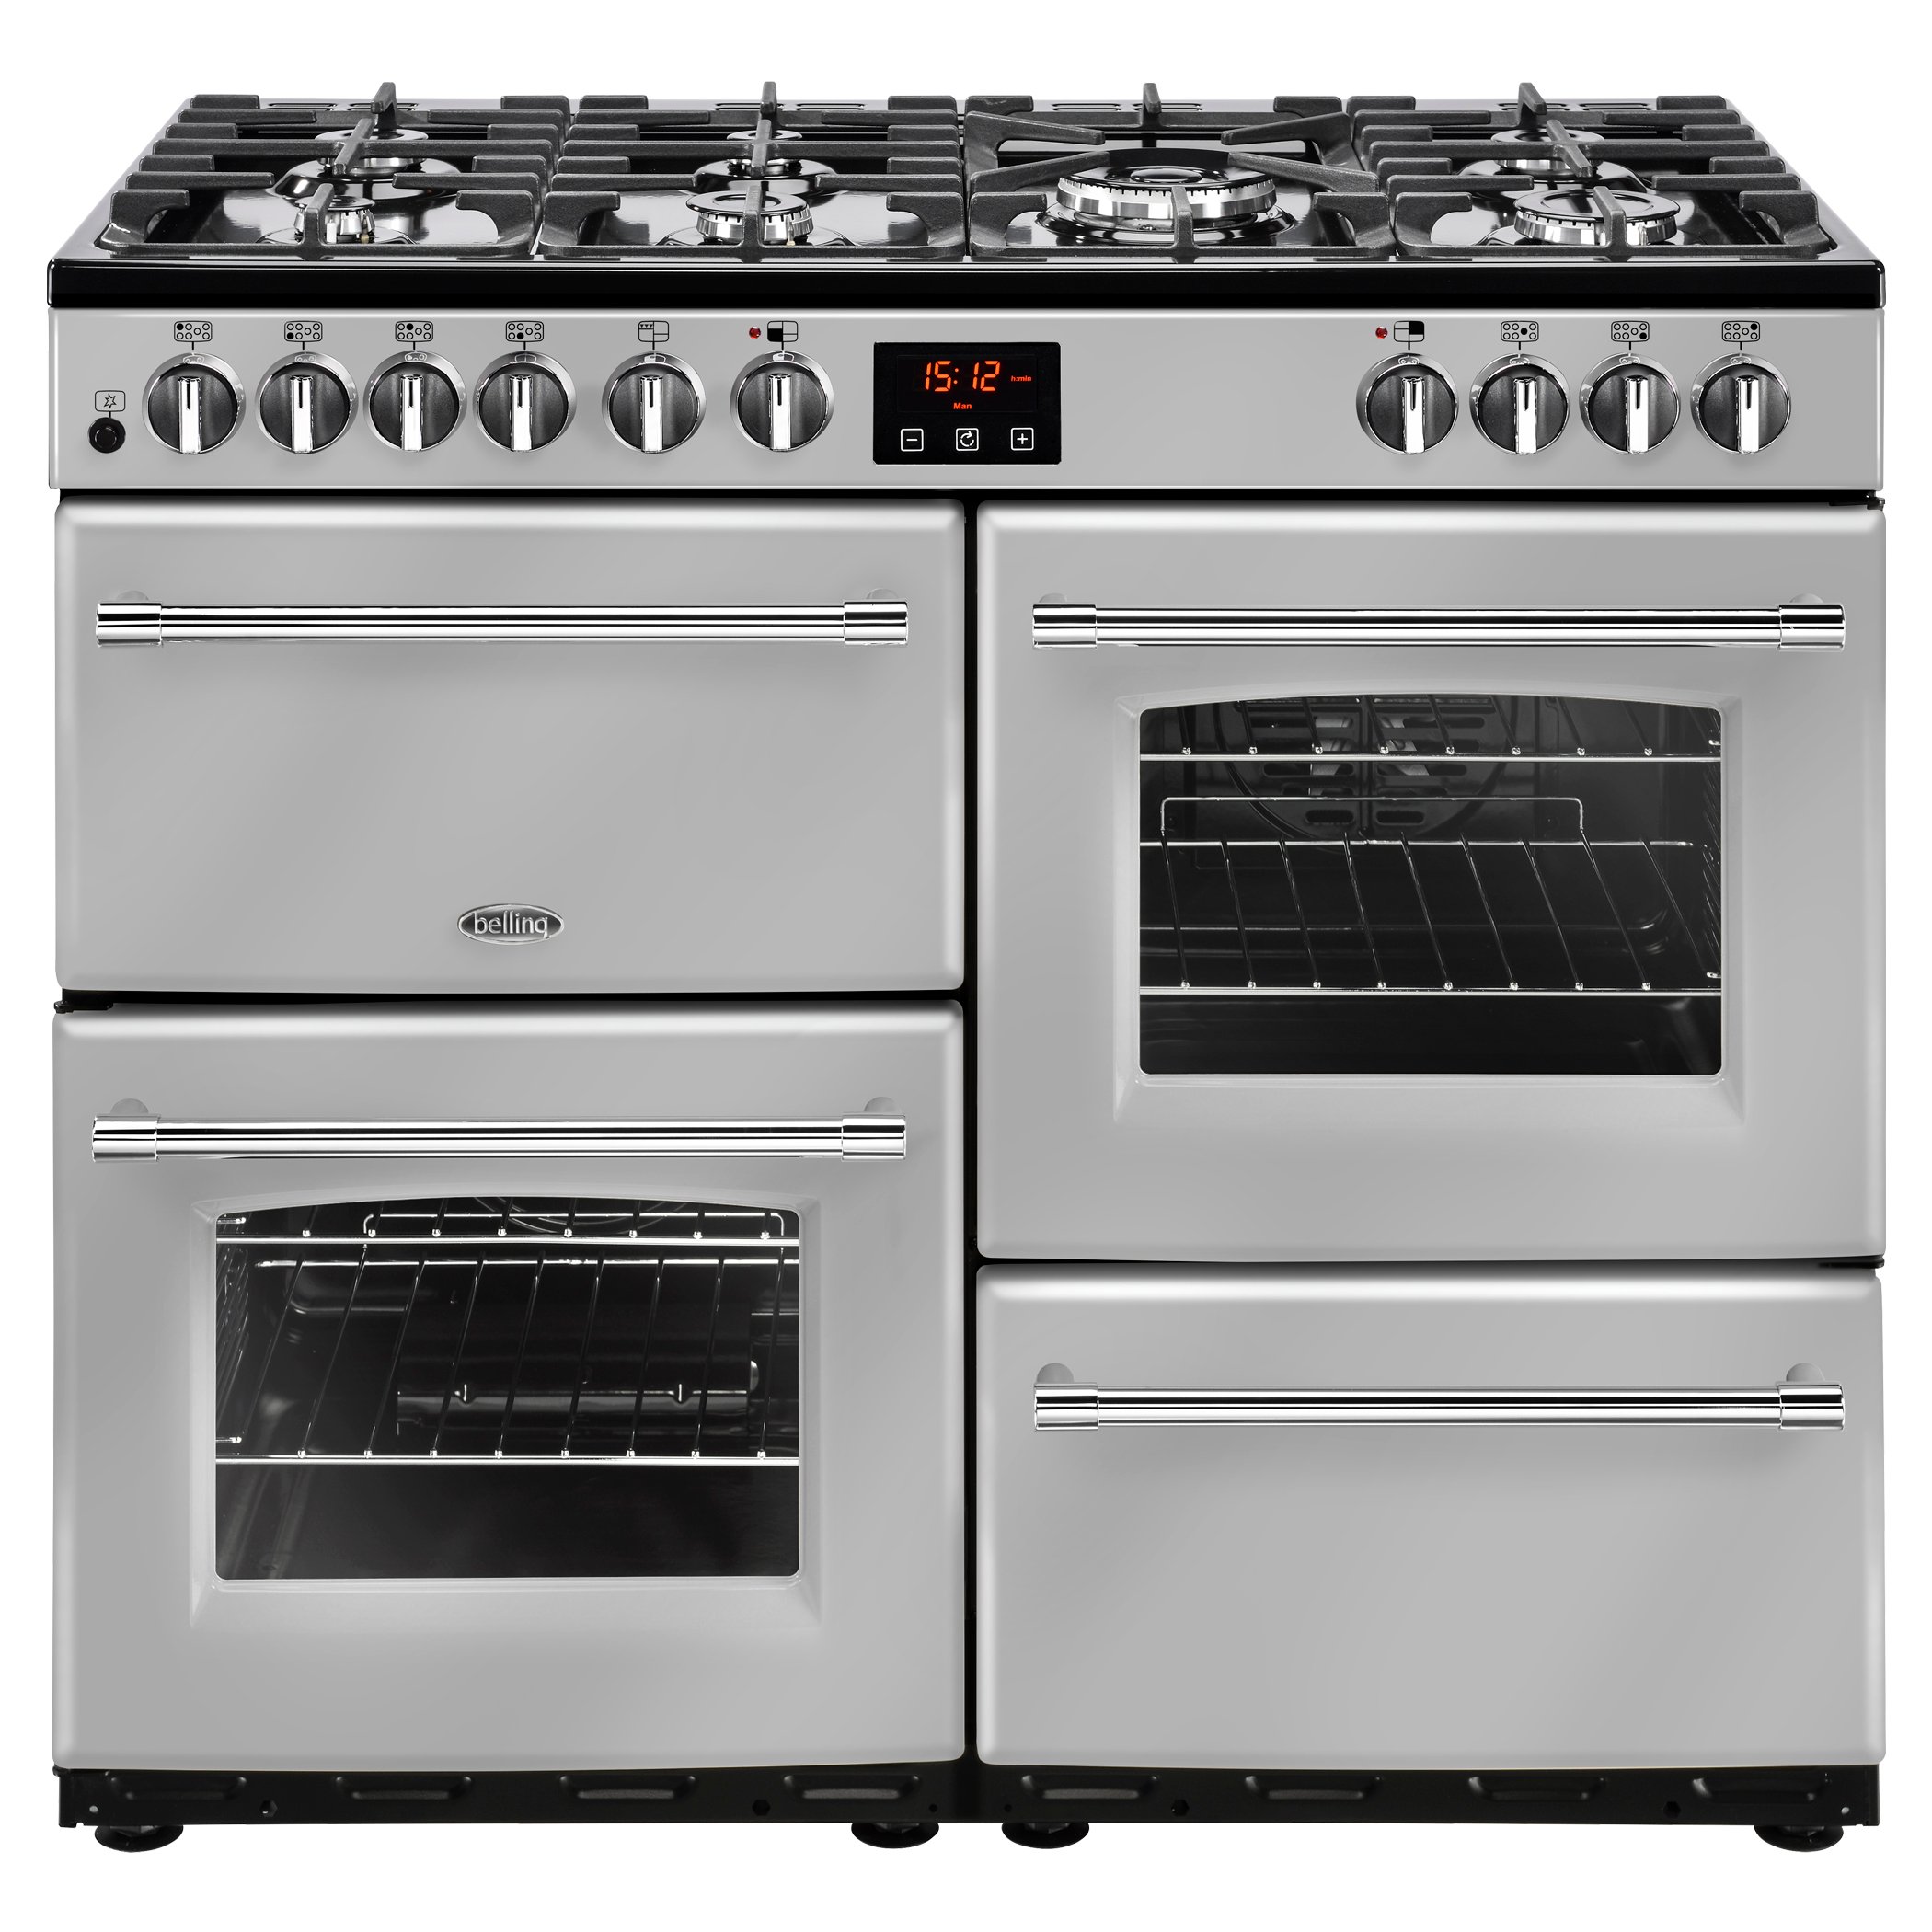 100cm dual fuel range cooker with 7 burner gas hob, 4kW PowerWok, Maxi-Clock, variable electric grill and easy clean enamel.